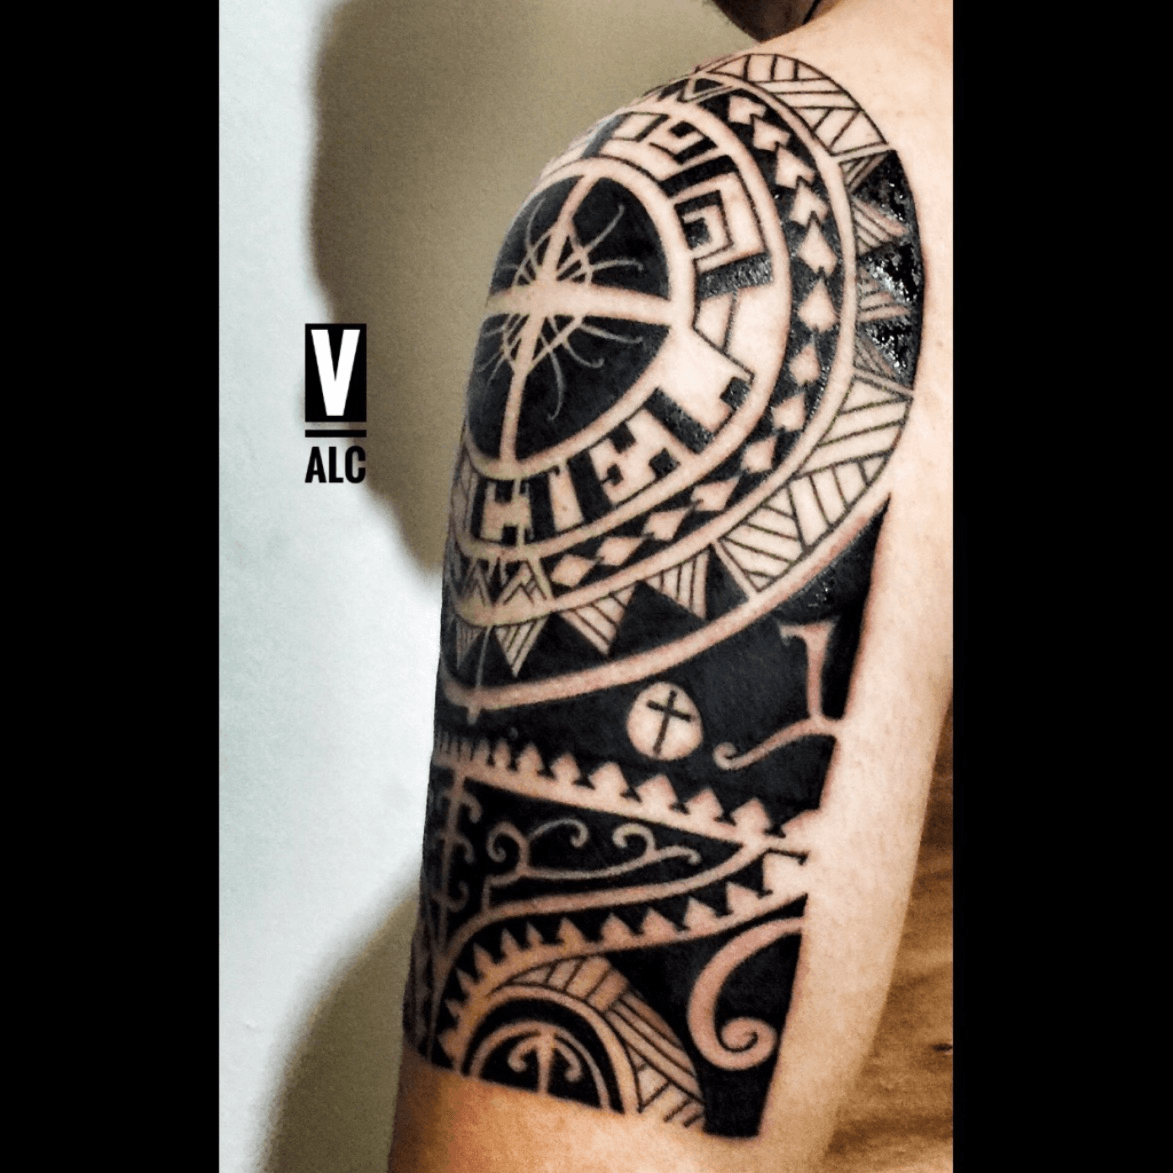 New tattoo inspired in the Amazonas by Daniel Acosta at La Emergente  Colombia  rtattoos